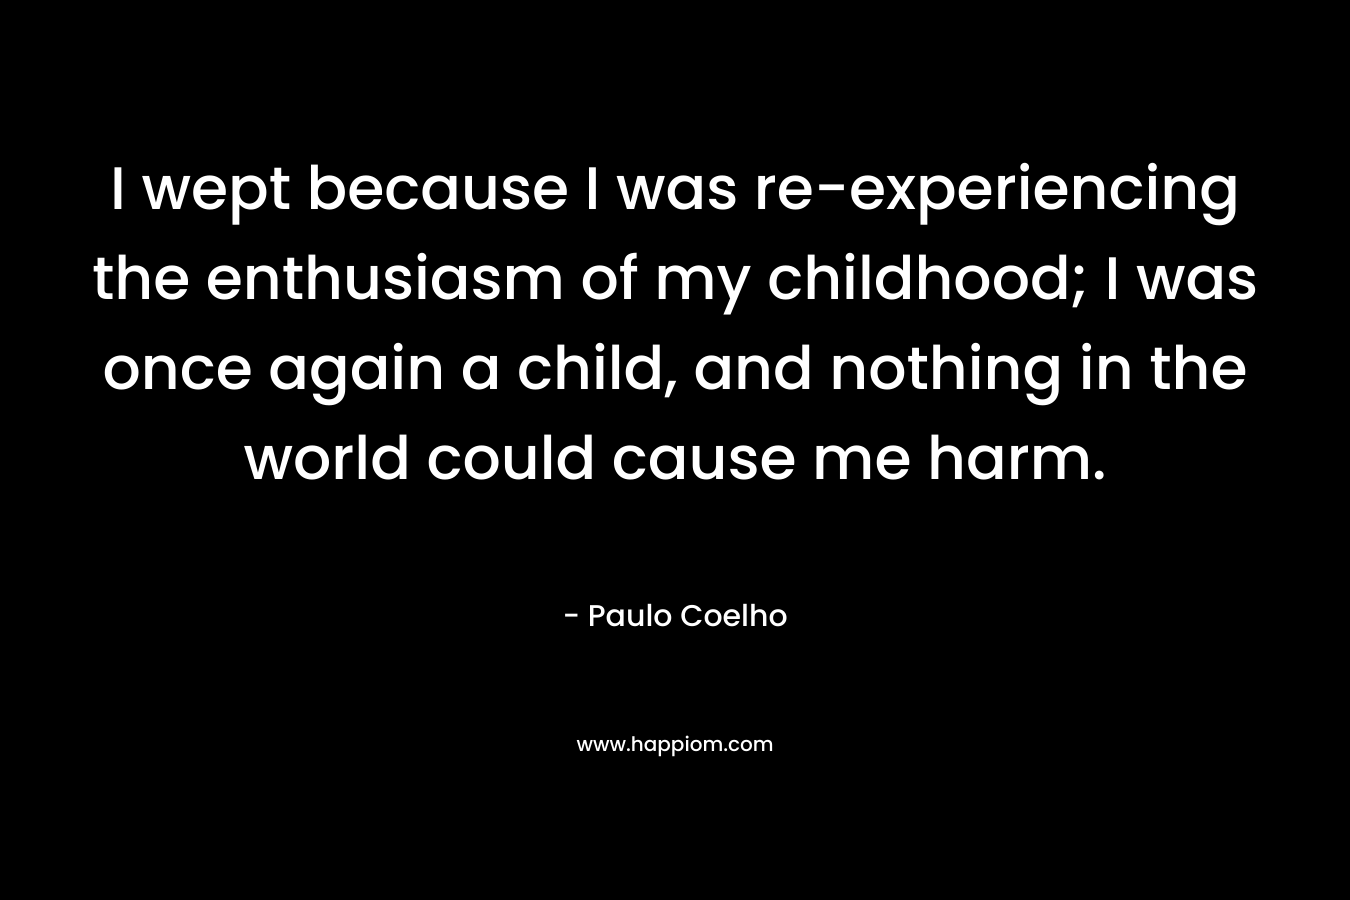 I wept because I was re-experiencing the enthusiasm of my childhood; I was once again a child, and nothing in the world could cause me harm.